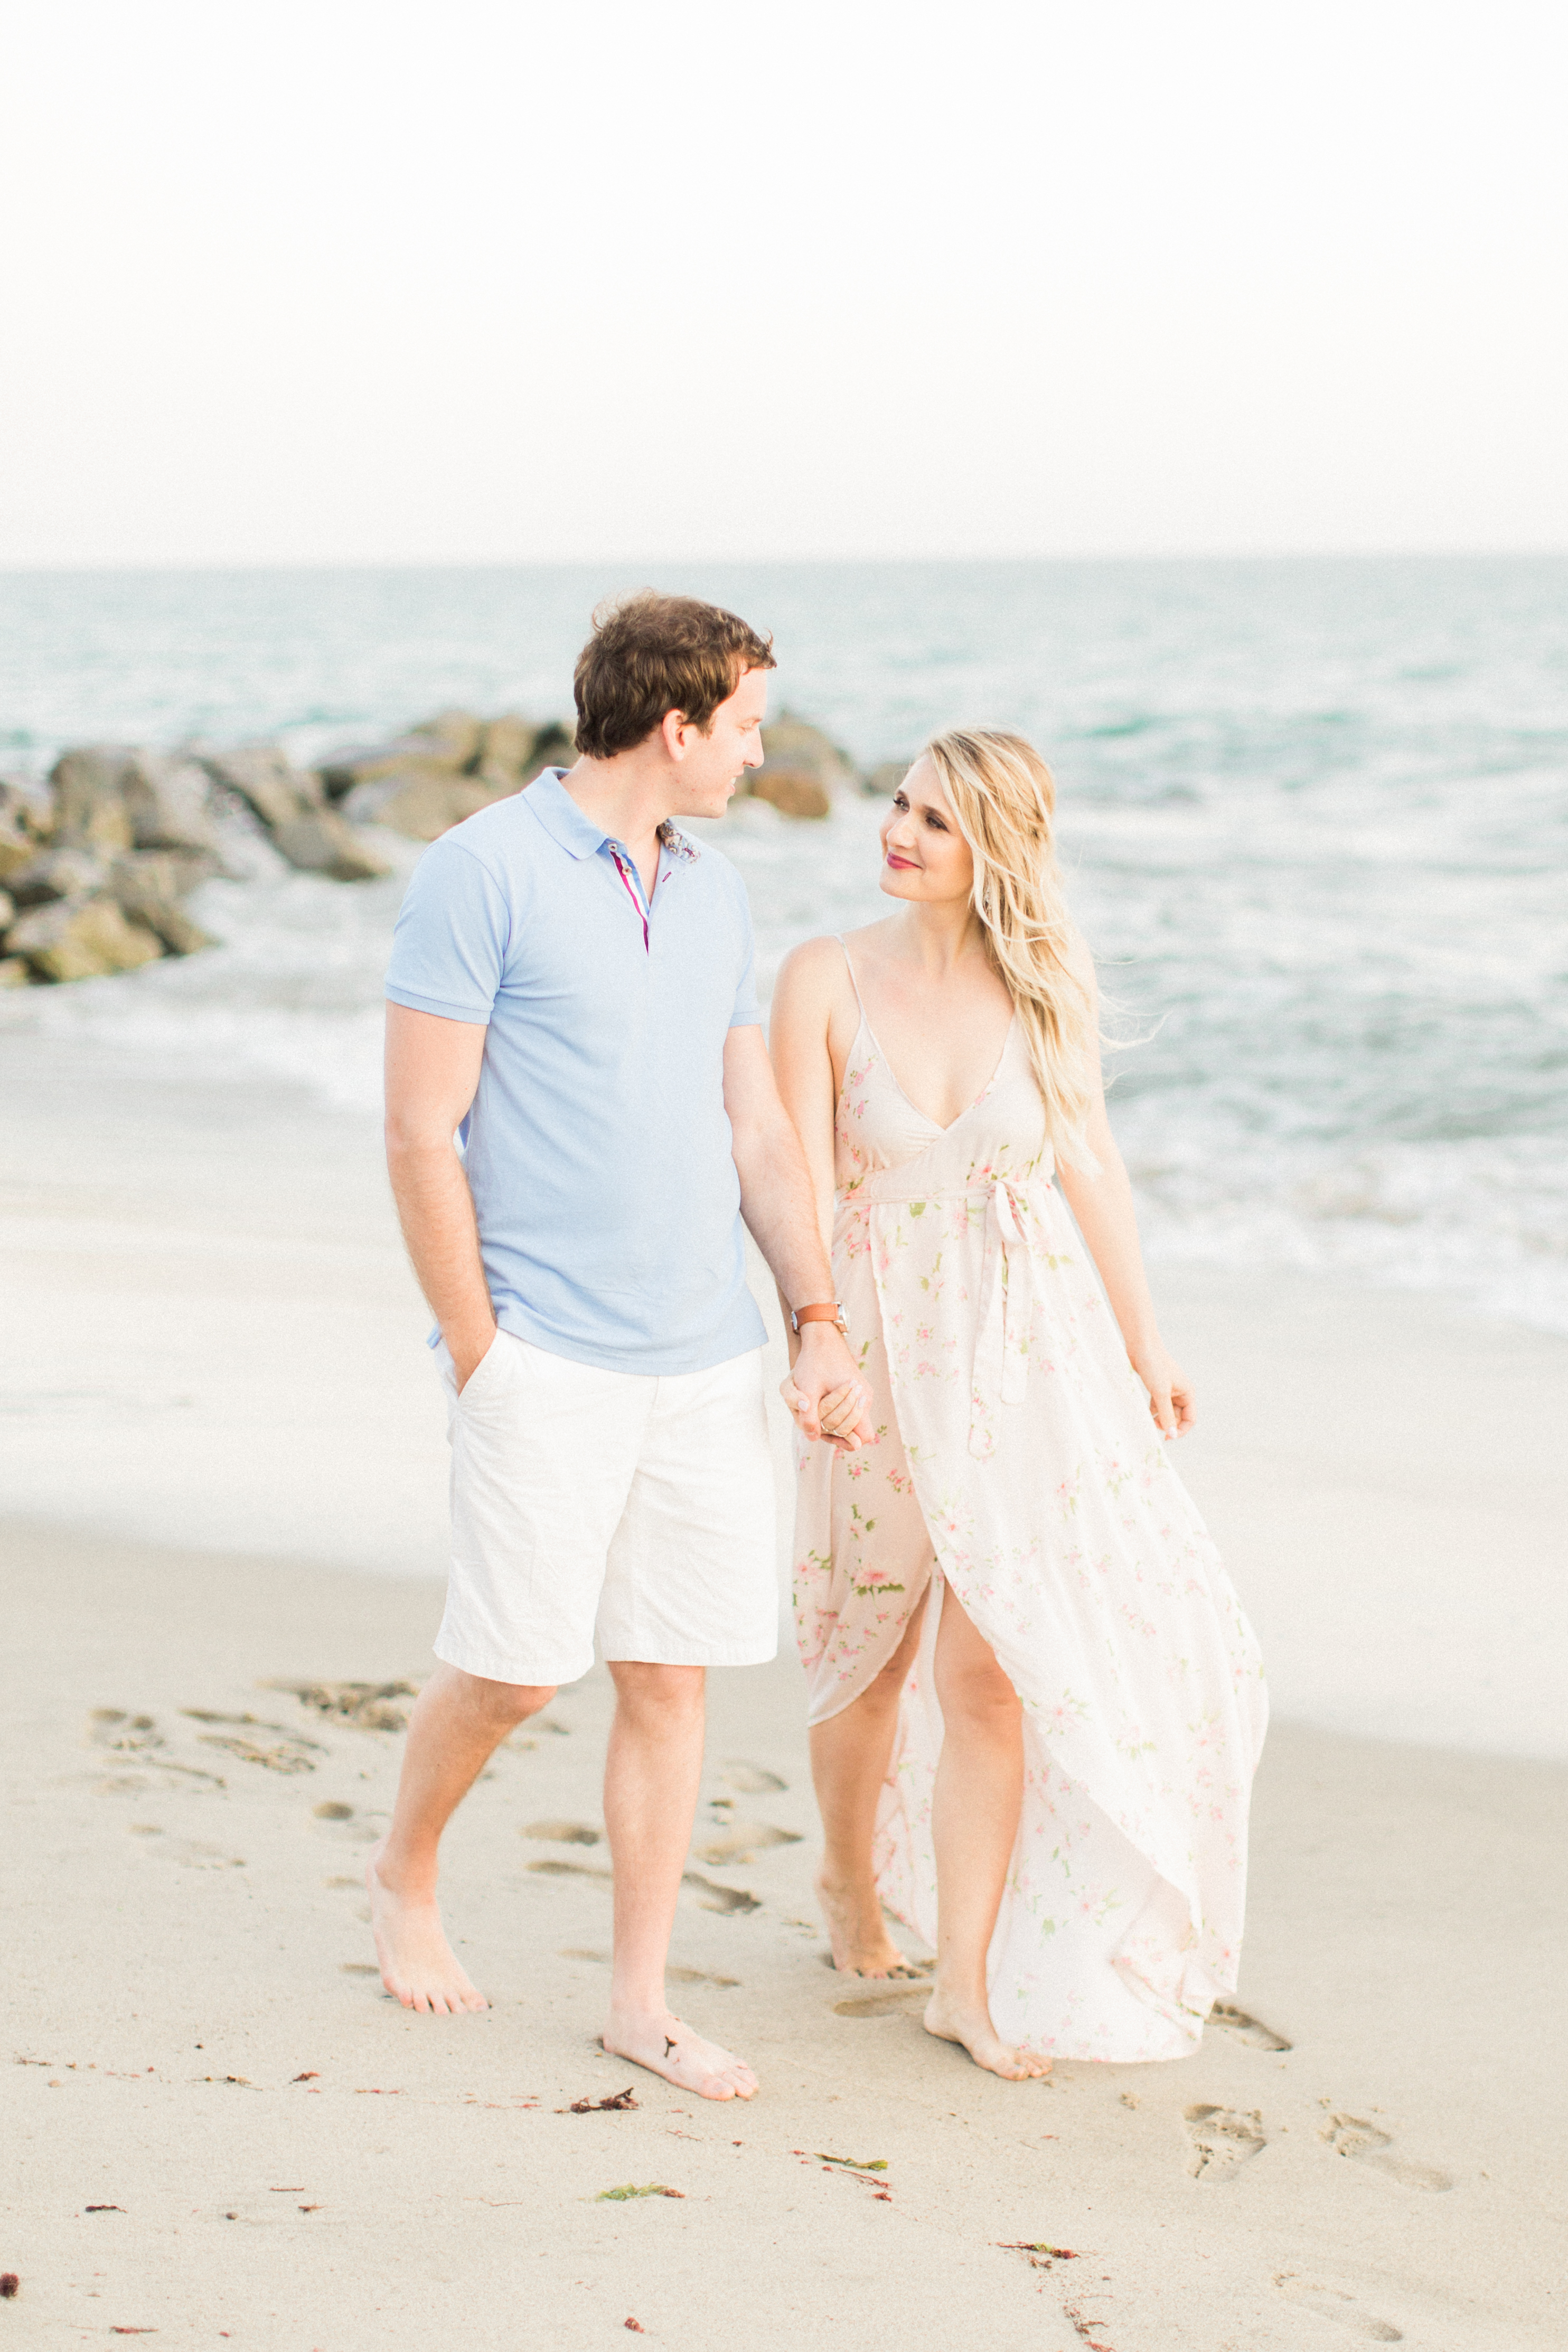 Floral wrap dress for an engagement shoot on the beach! 